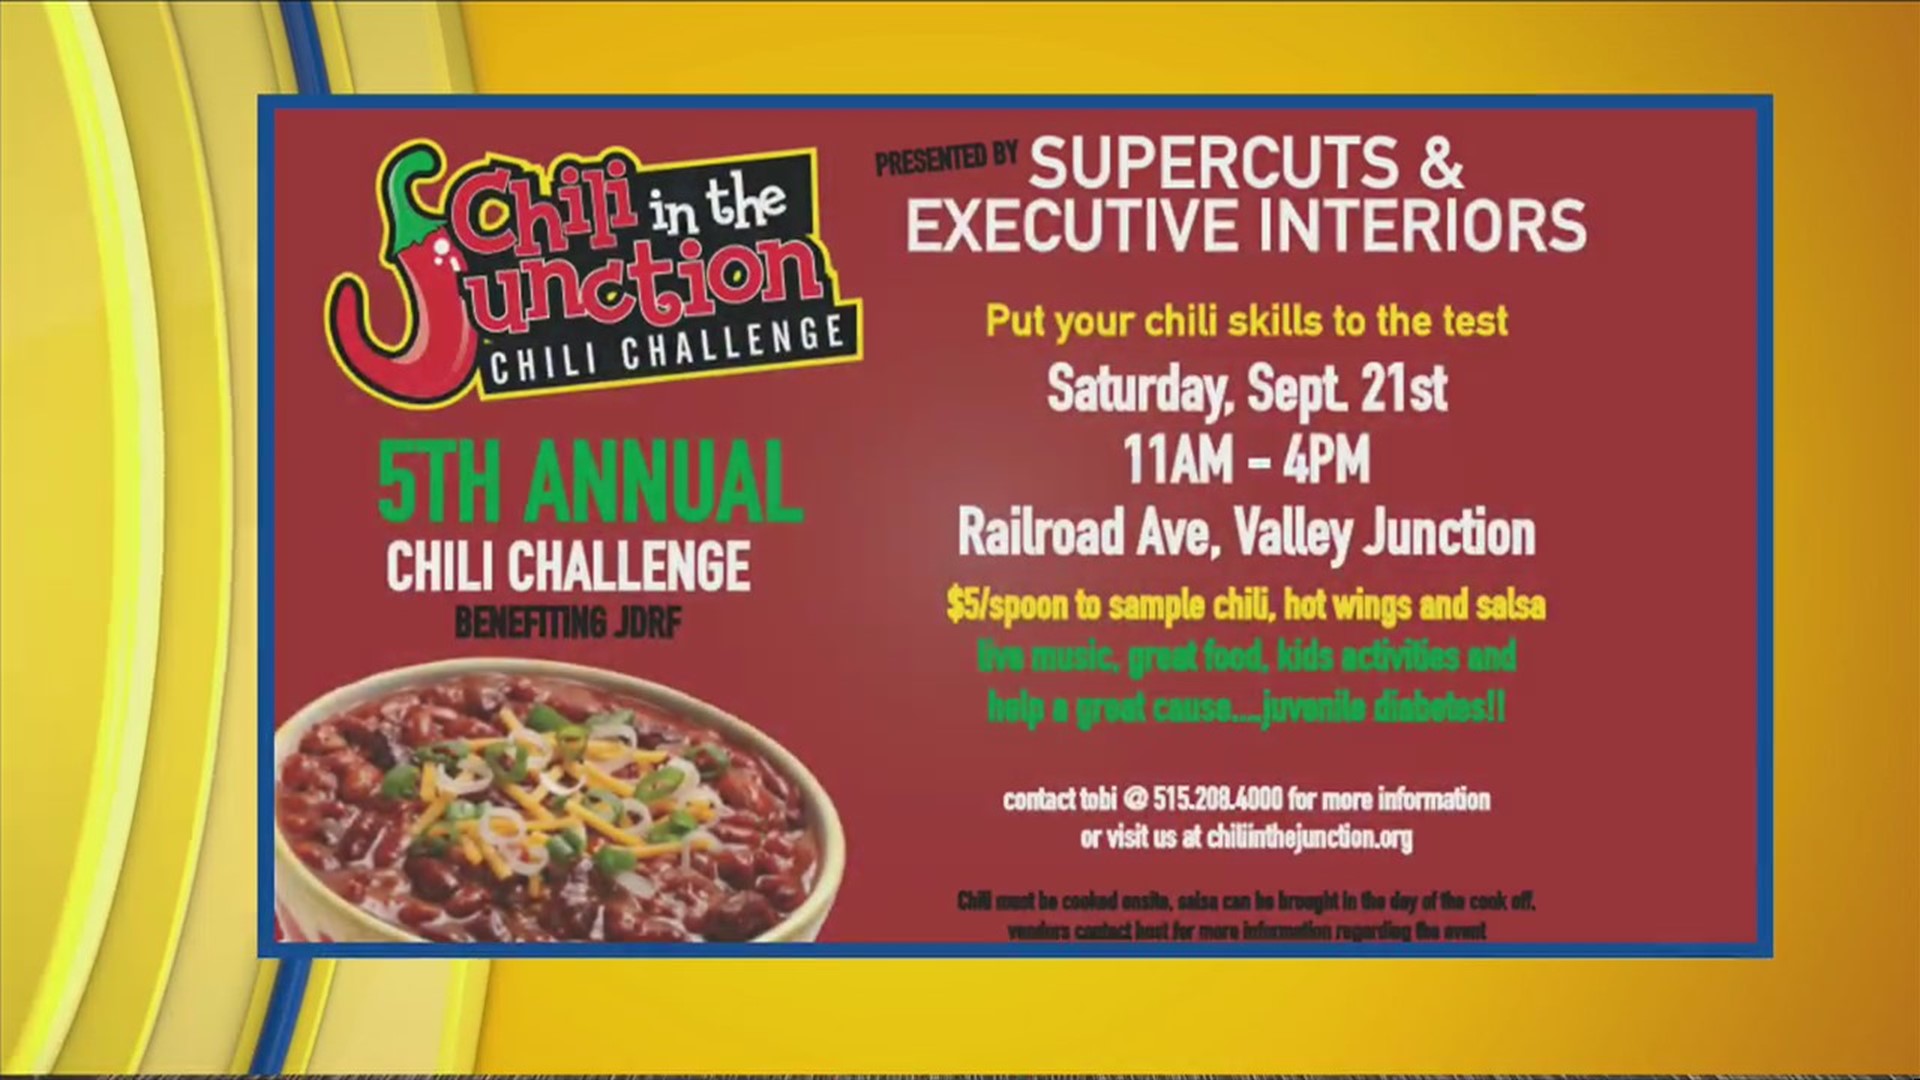 Chili in the Junction’s 5th annual Chili Challenge Event on September 21st